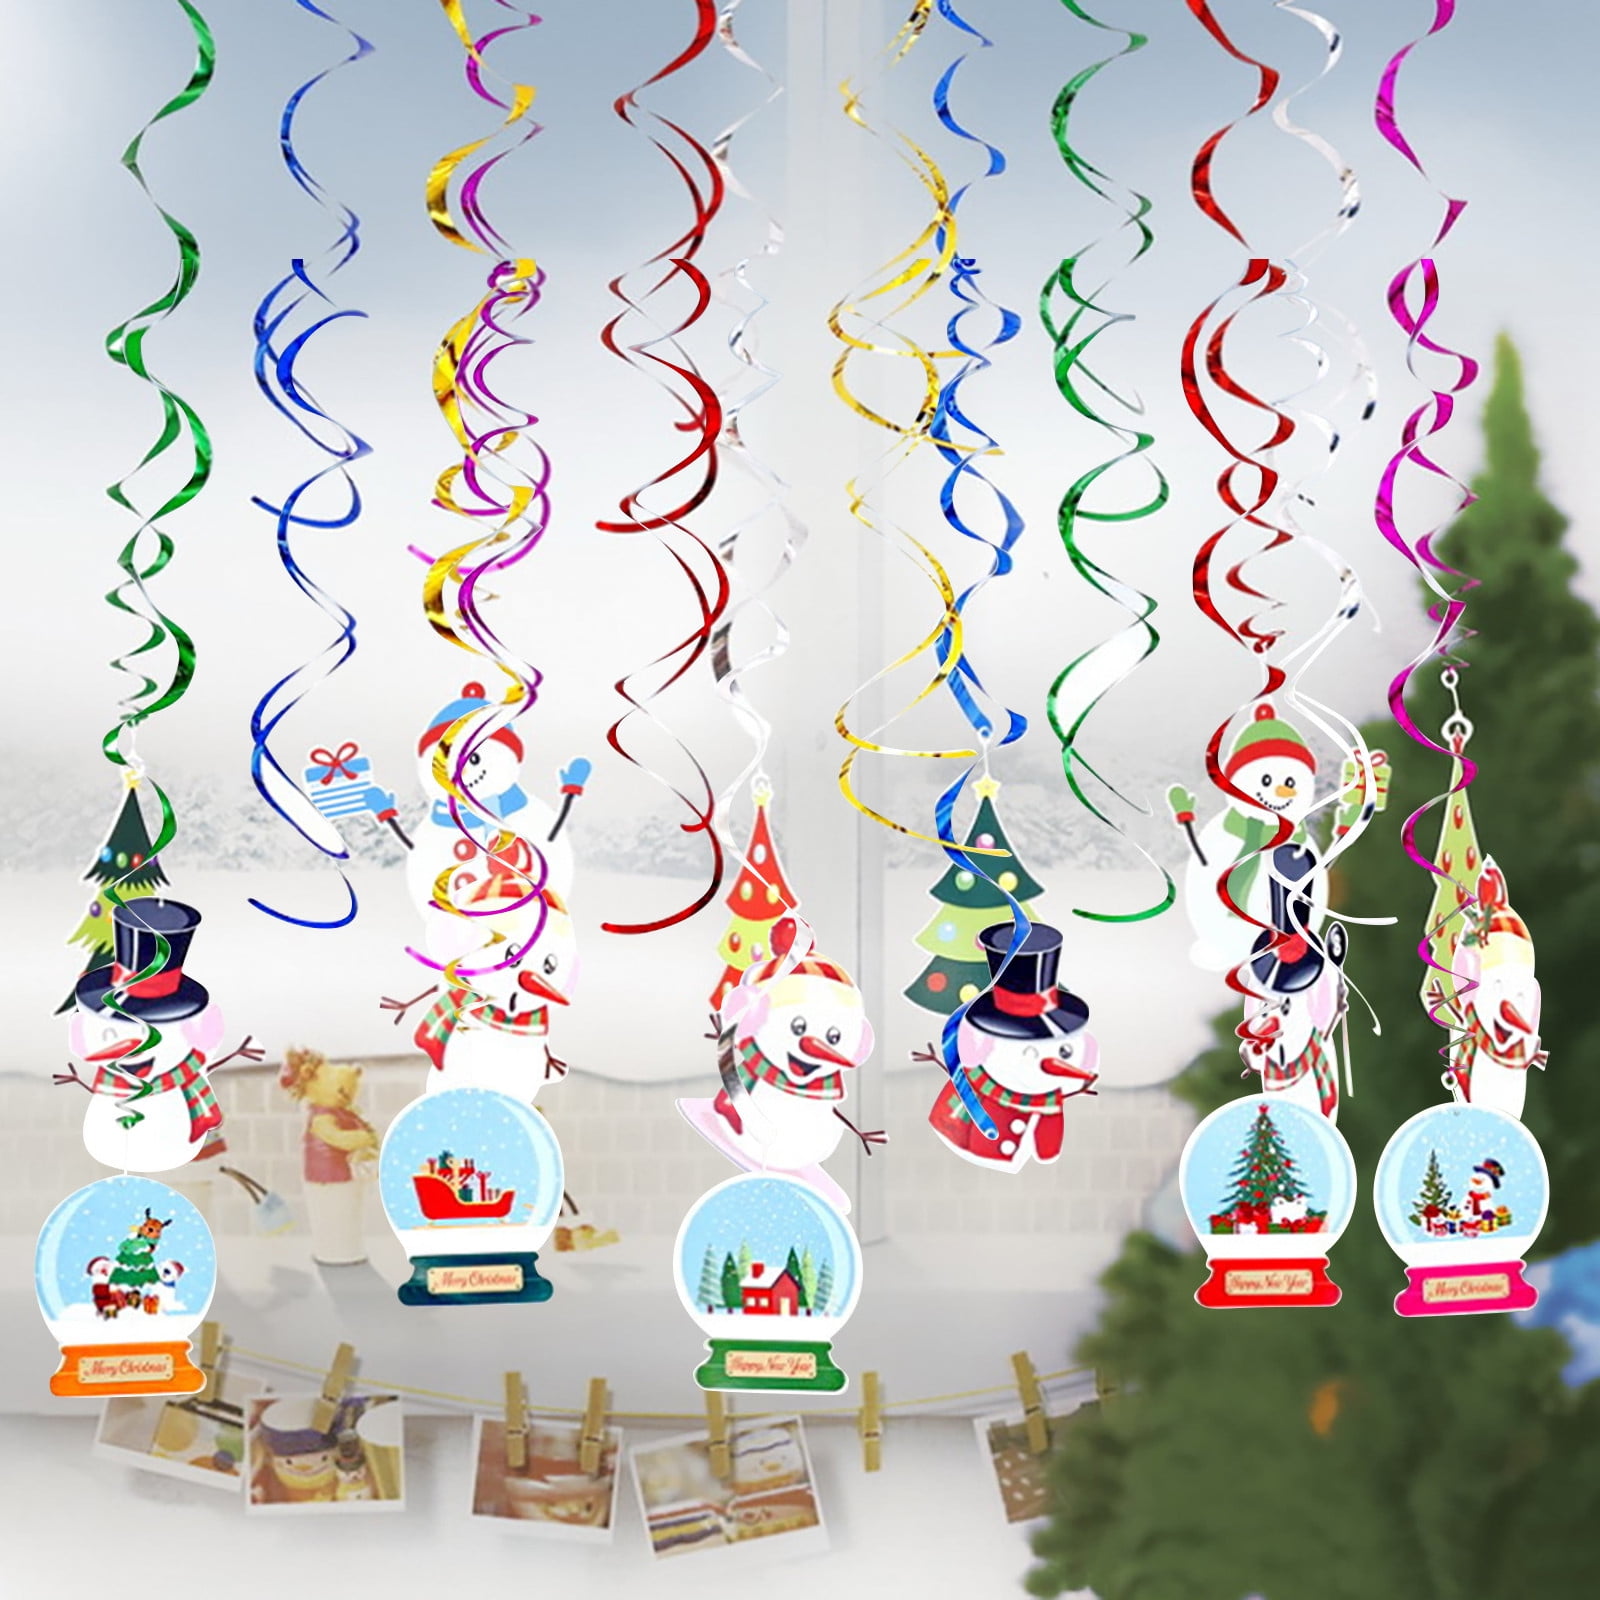 Kayannuo Christmas Decorations Christmas Clearance Christmas Hanging Swirl  Decorations 6pcs PET Ceiling Hanging Swirl Yard Party Christmas Ornaments 